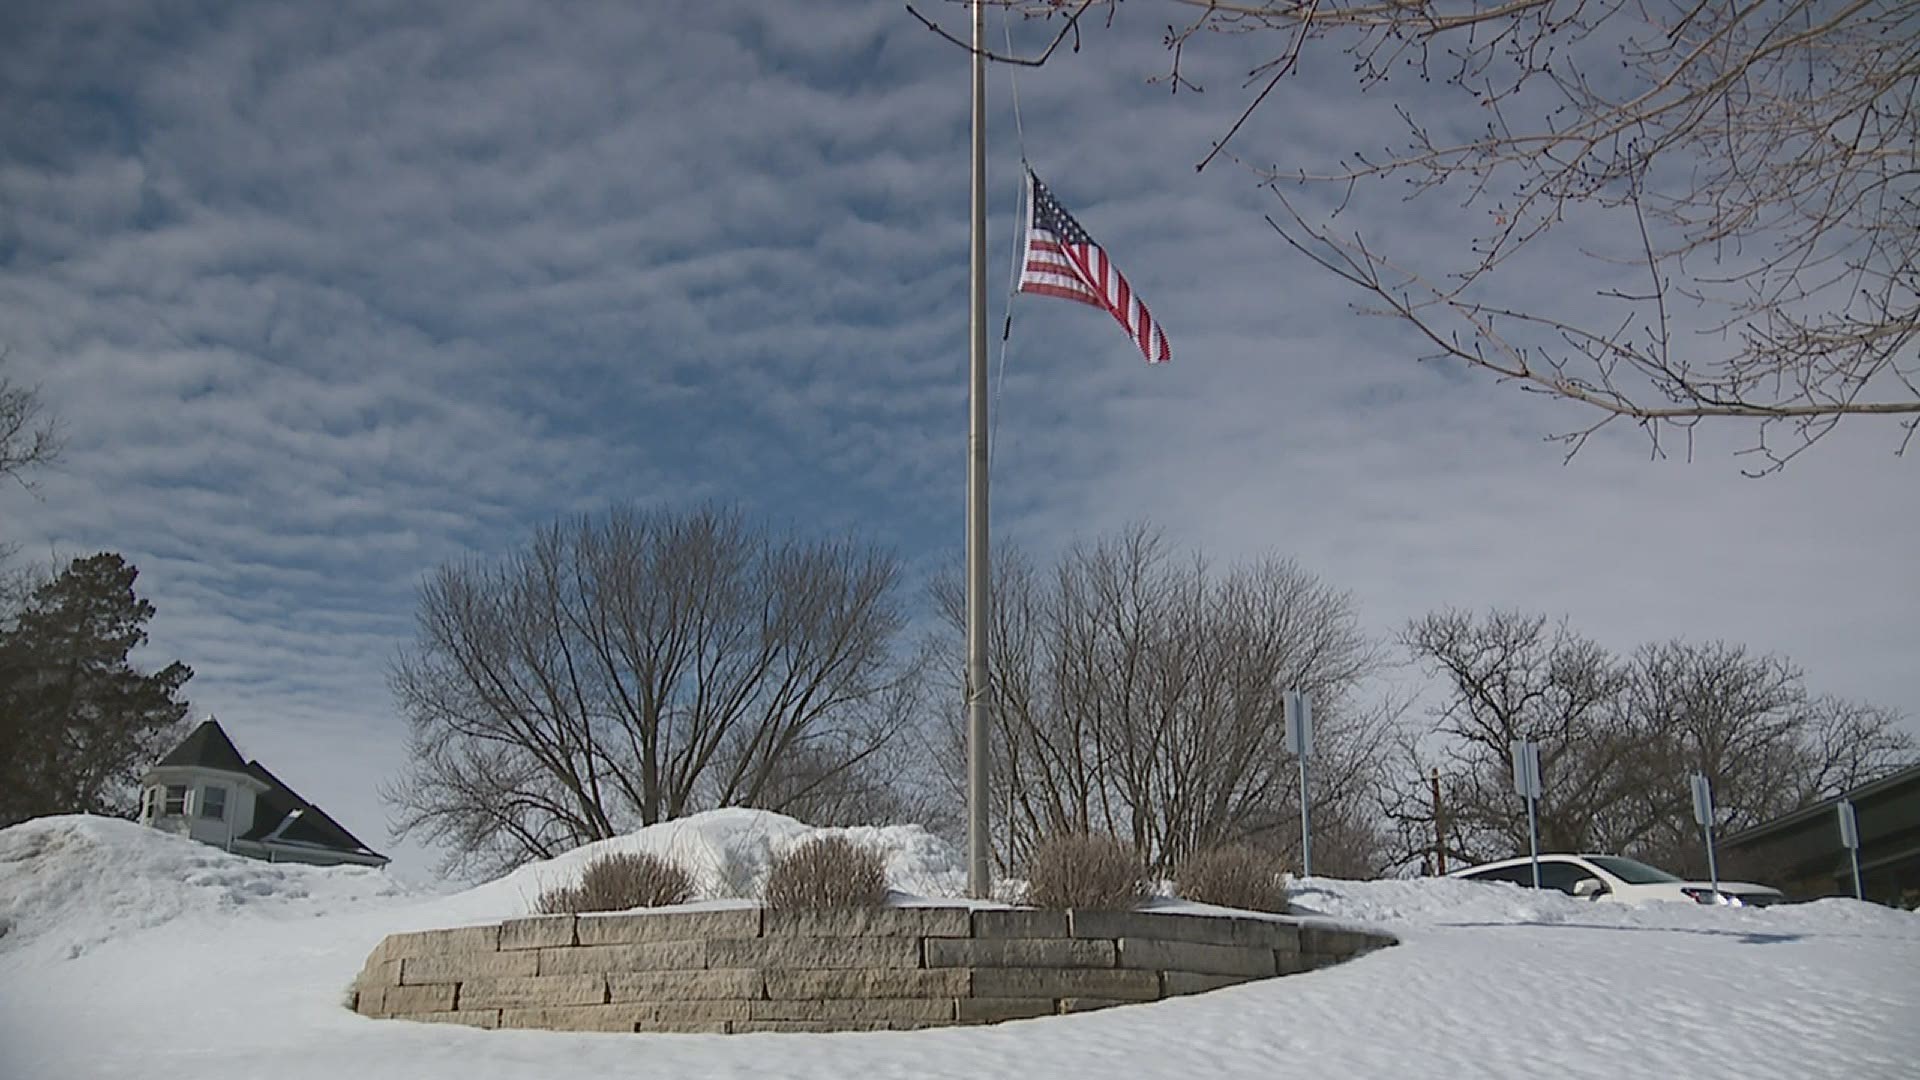 Gov. Reynolds is order the flags to be lowered in honor of the 500,000 American lives lost to COVID-19.